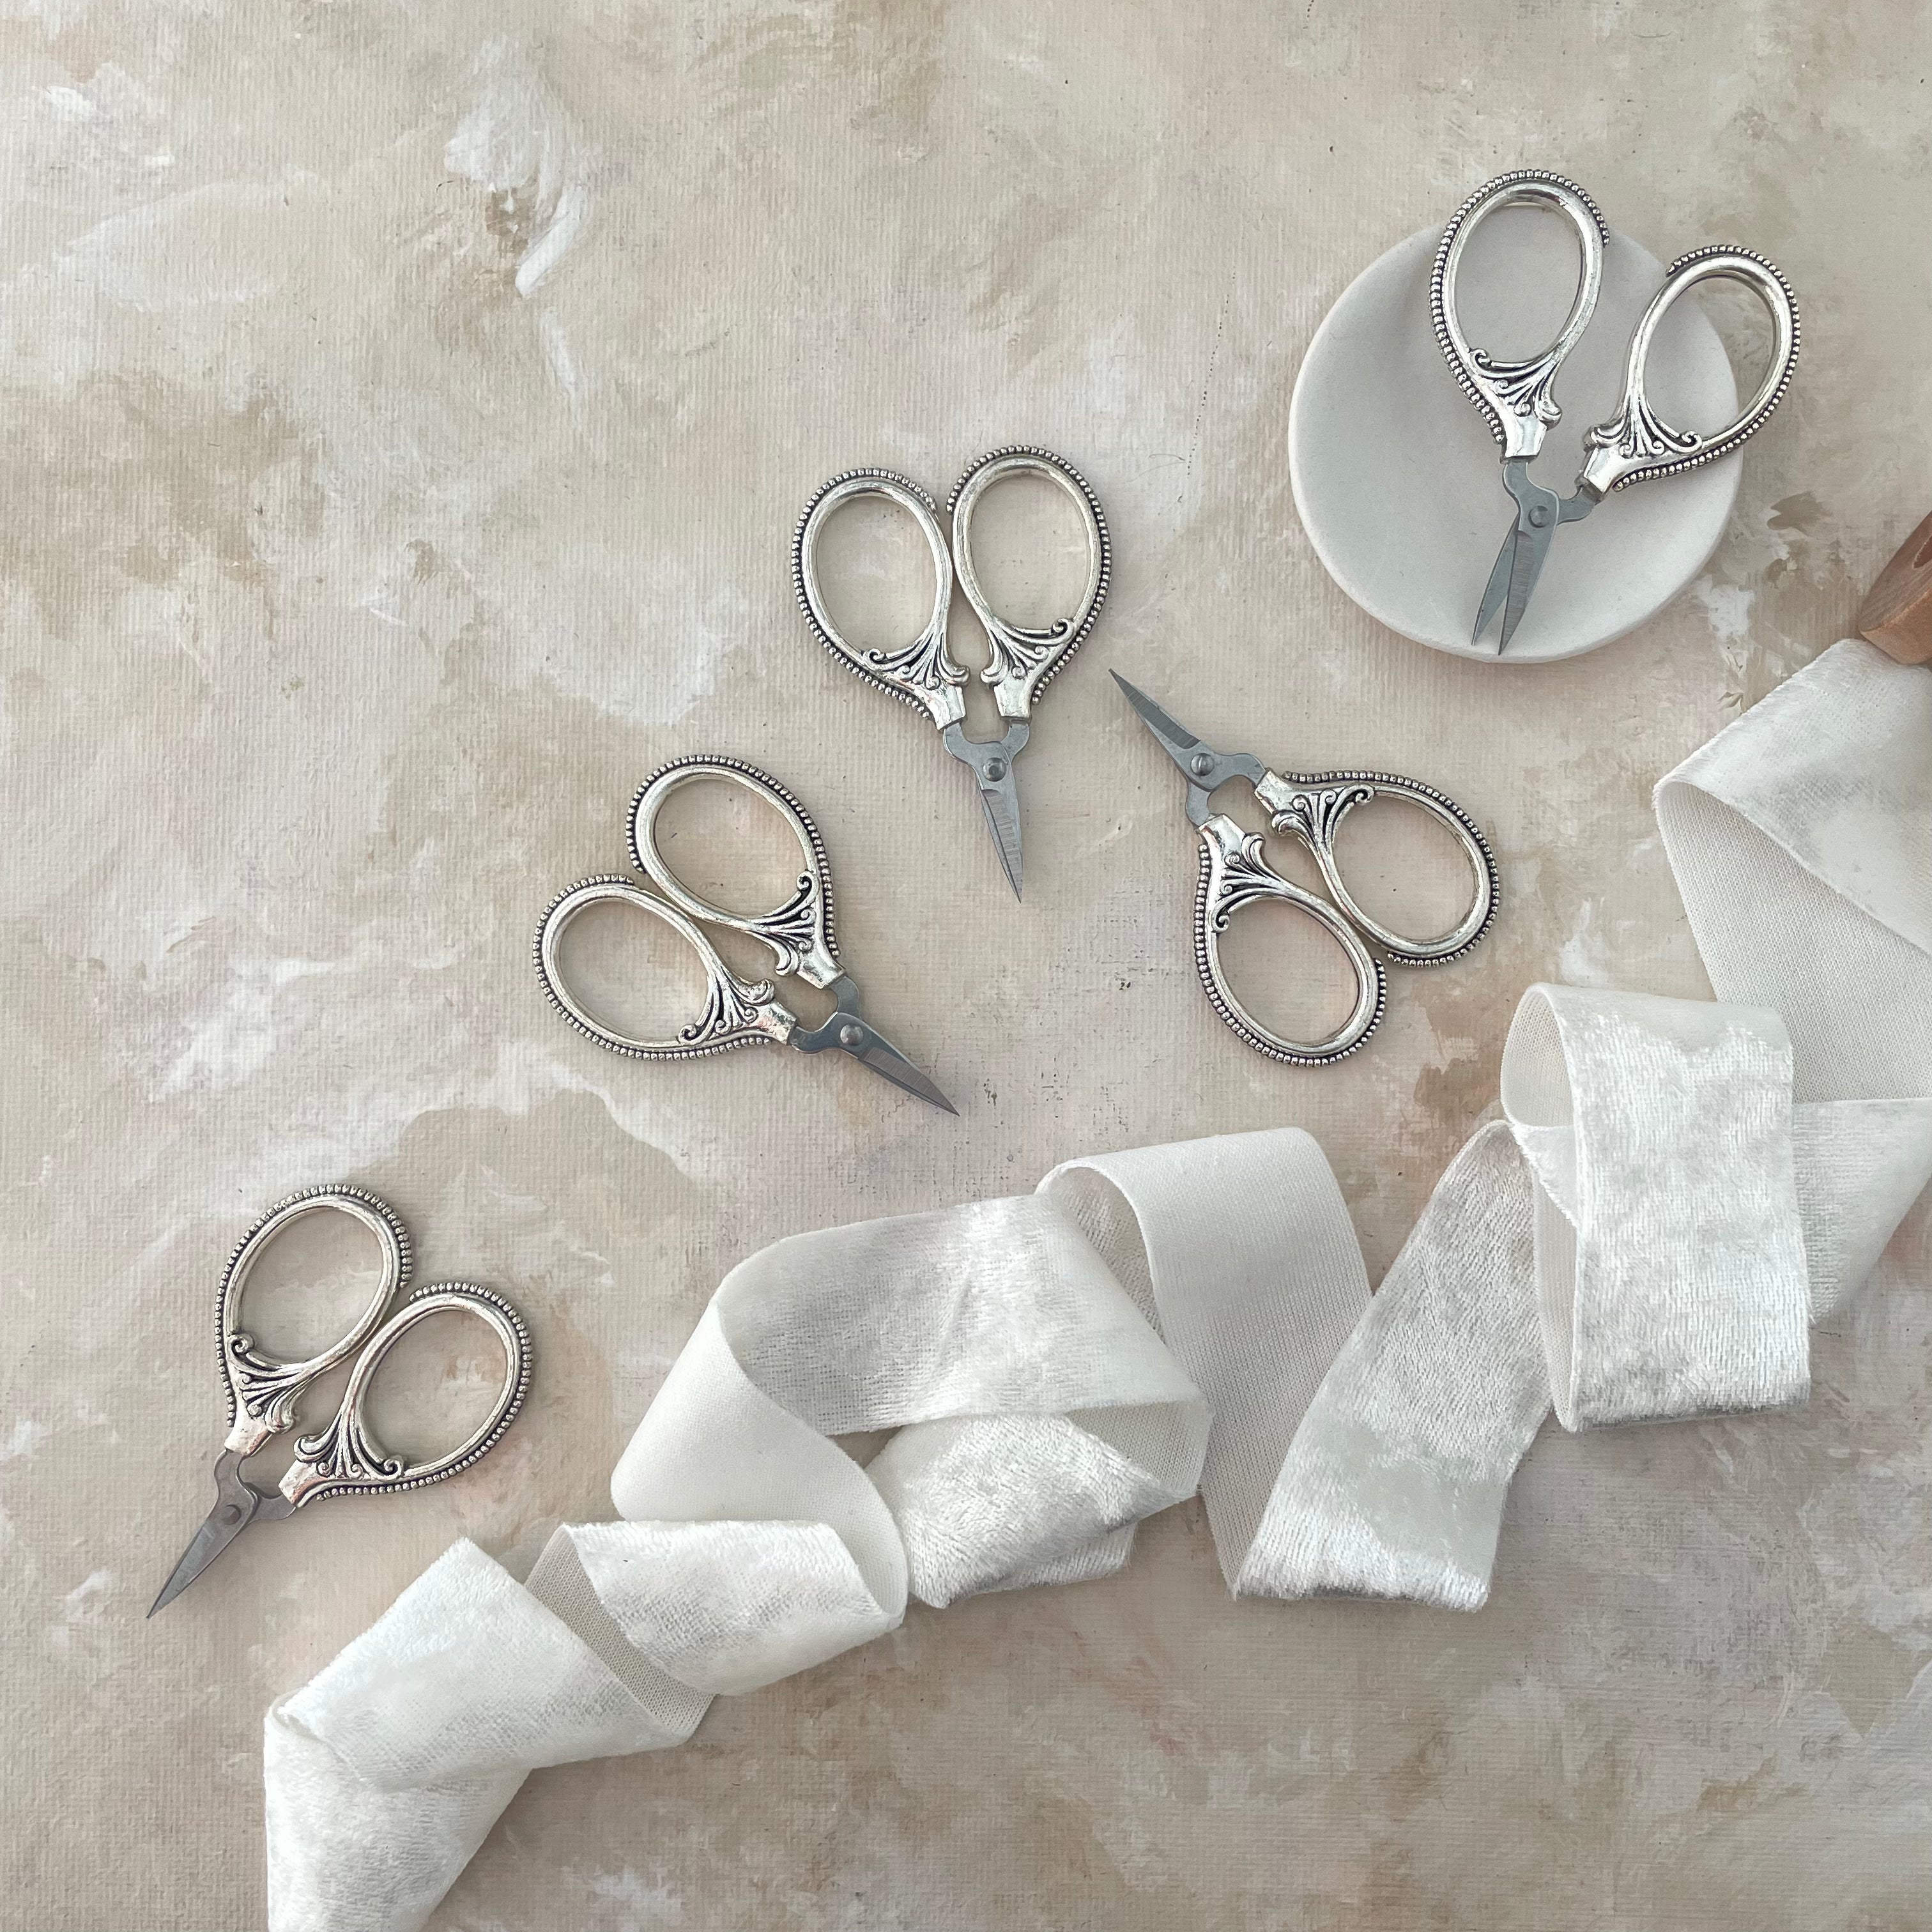 Mini SILVER Scissors: 2 ¼” long x 1 ⅝” at widest point -  Wedding Flat lay props from Champagne & GRIT